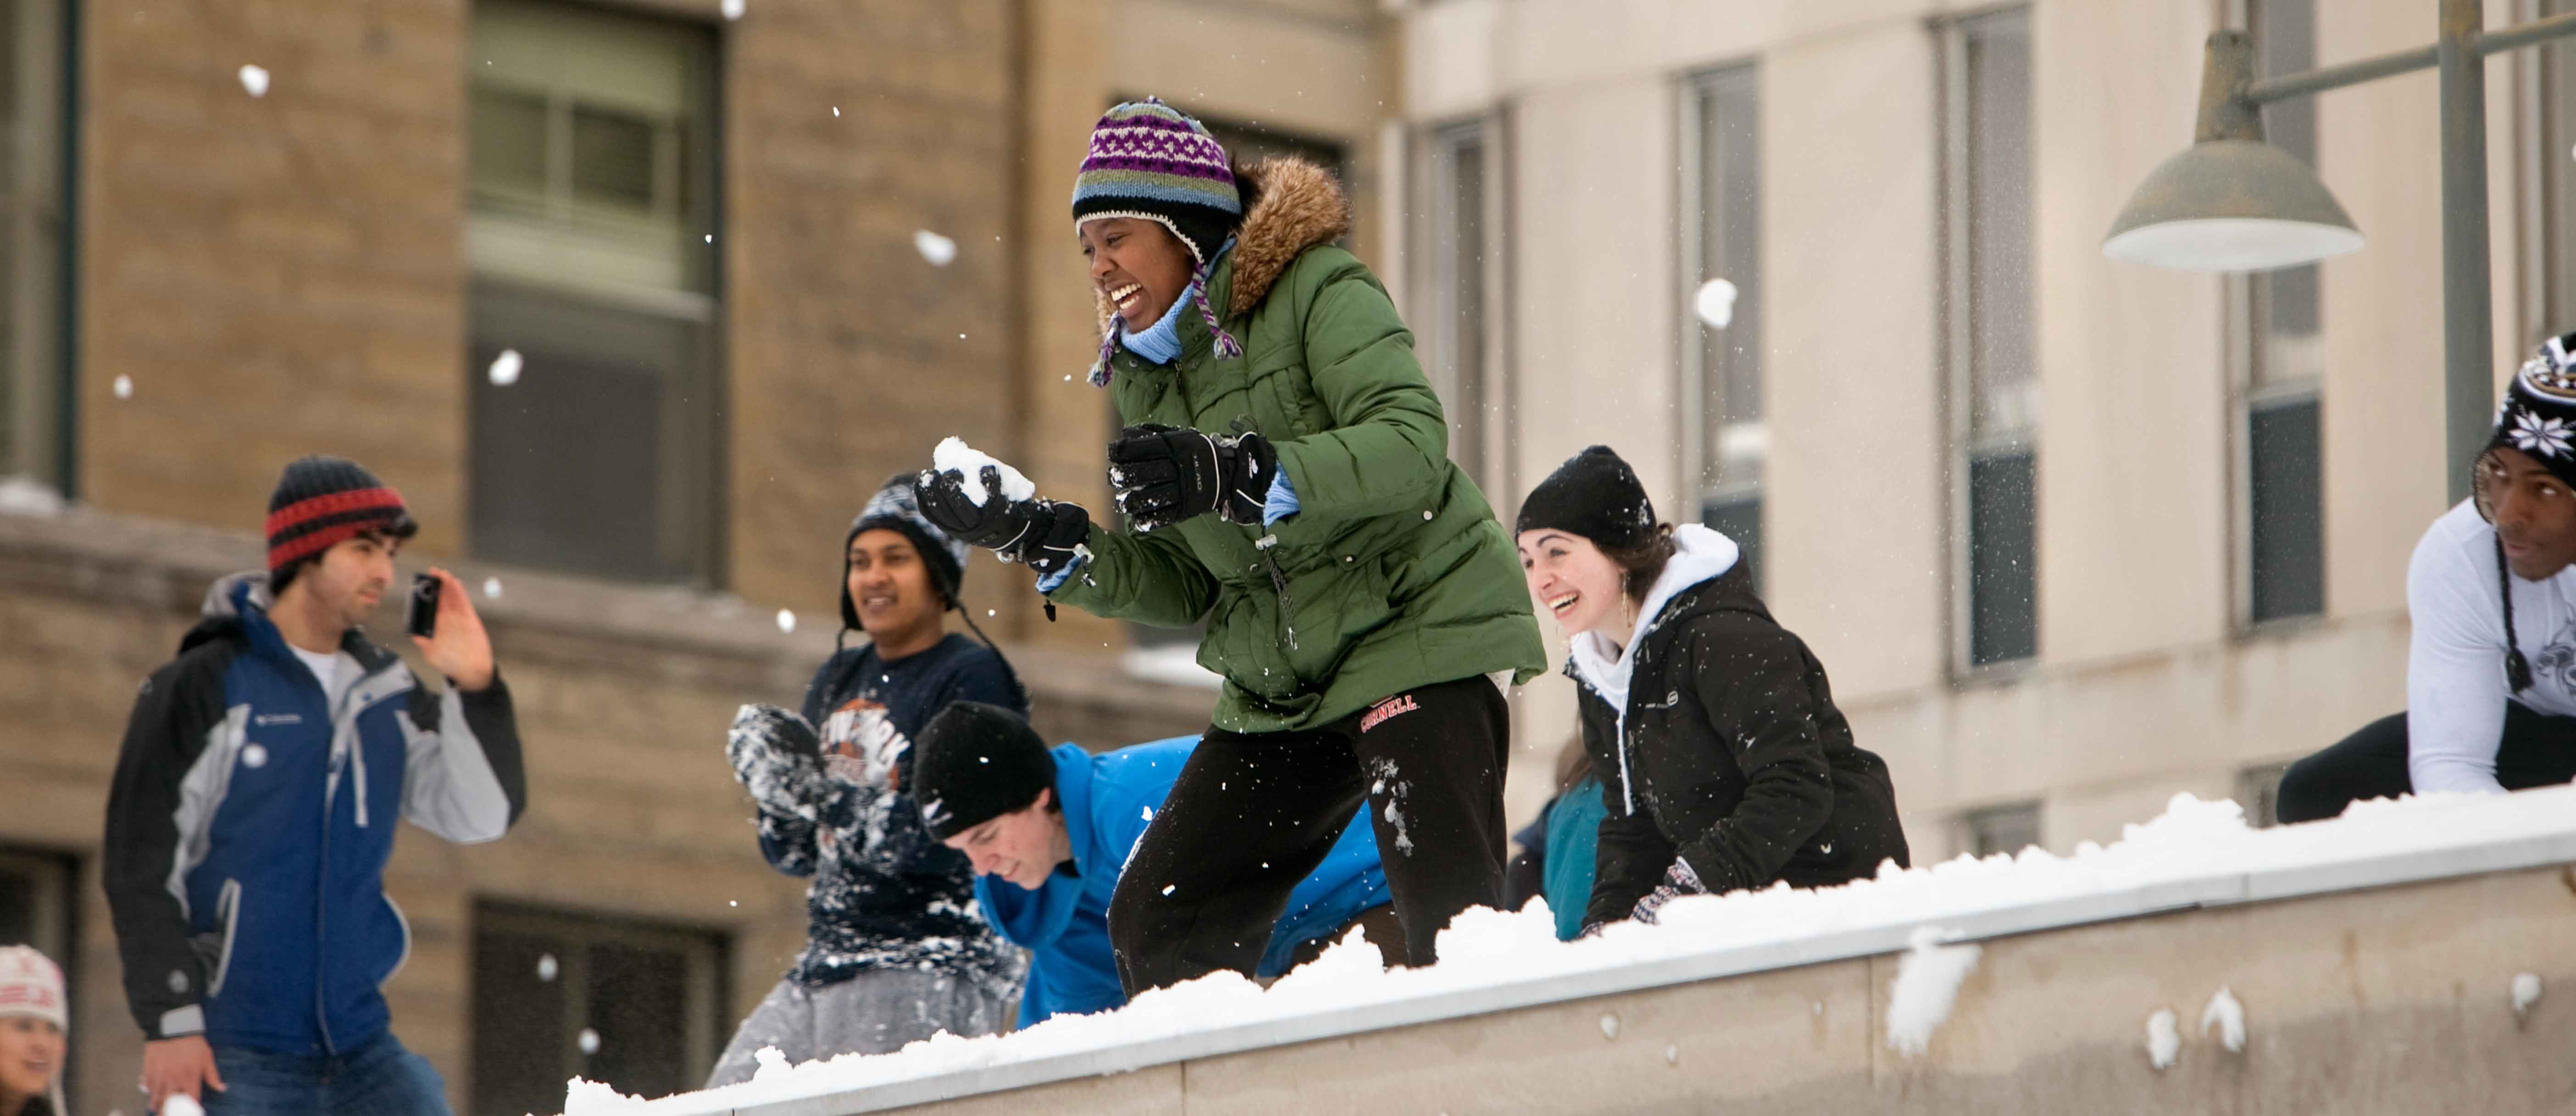 Students toss snowballs on central campus